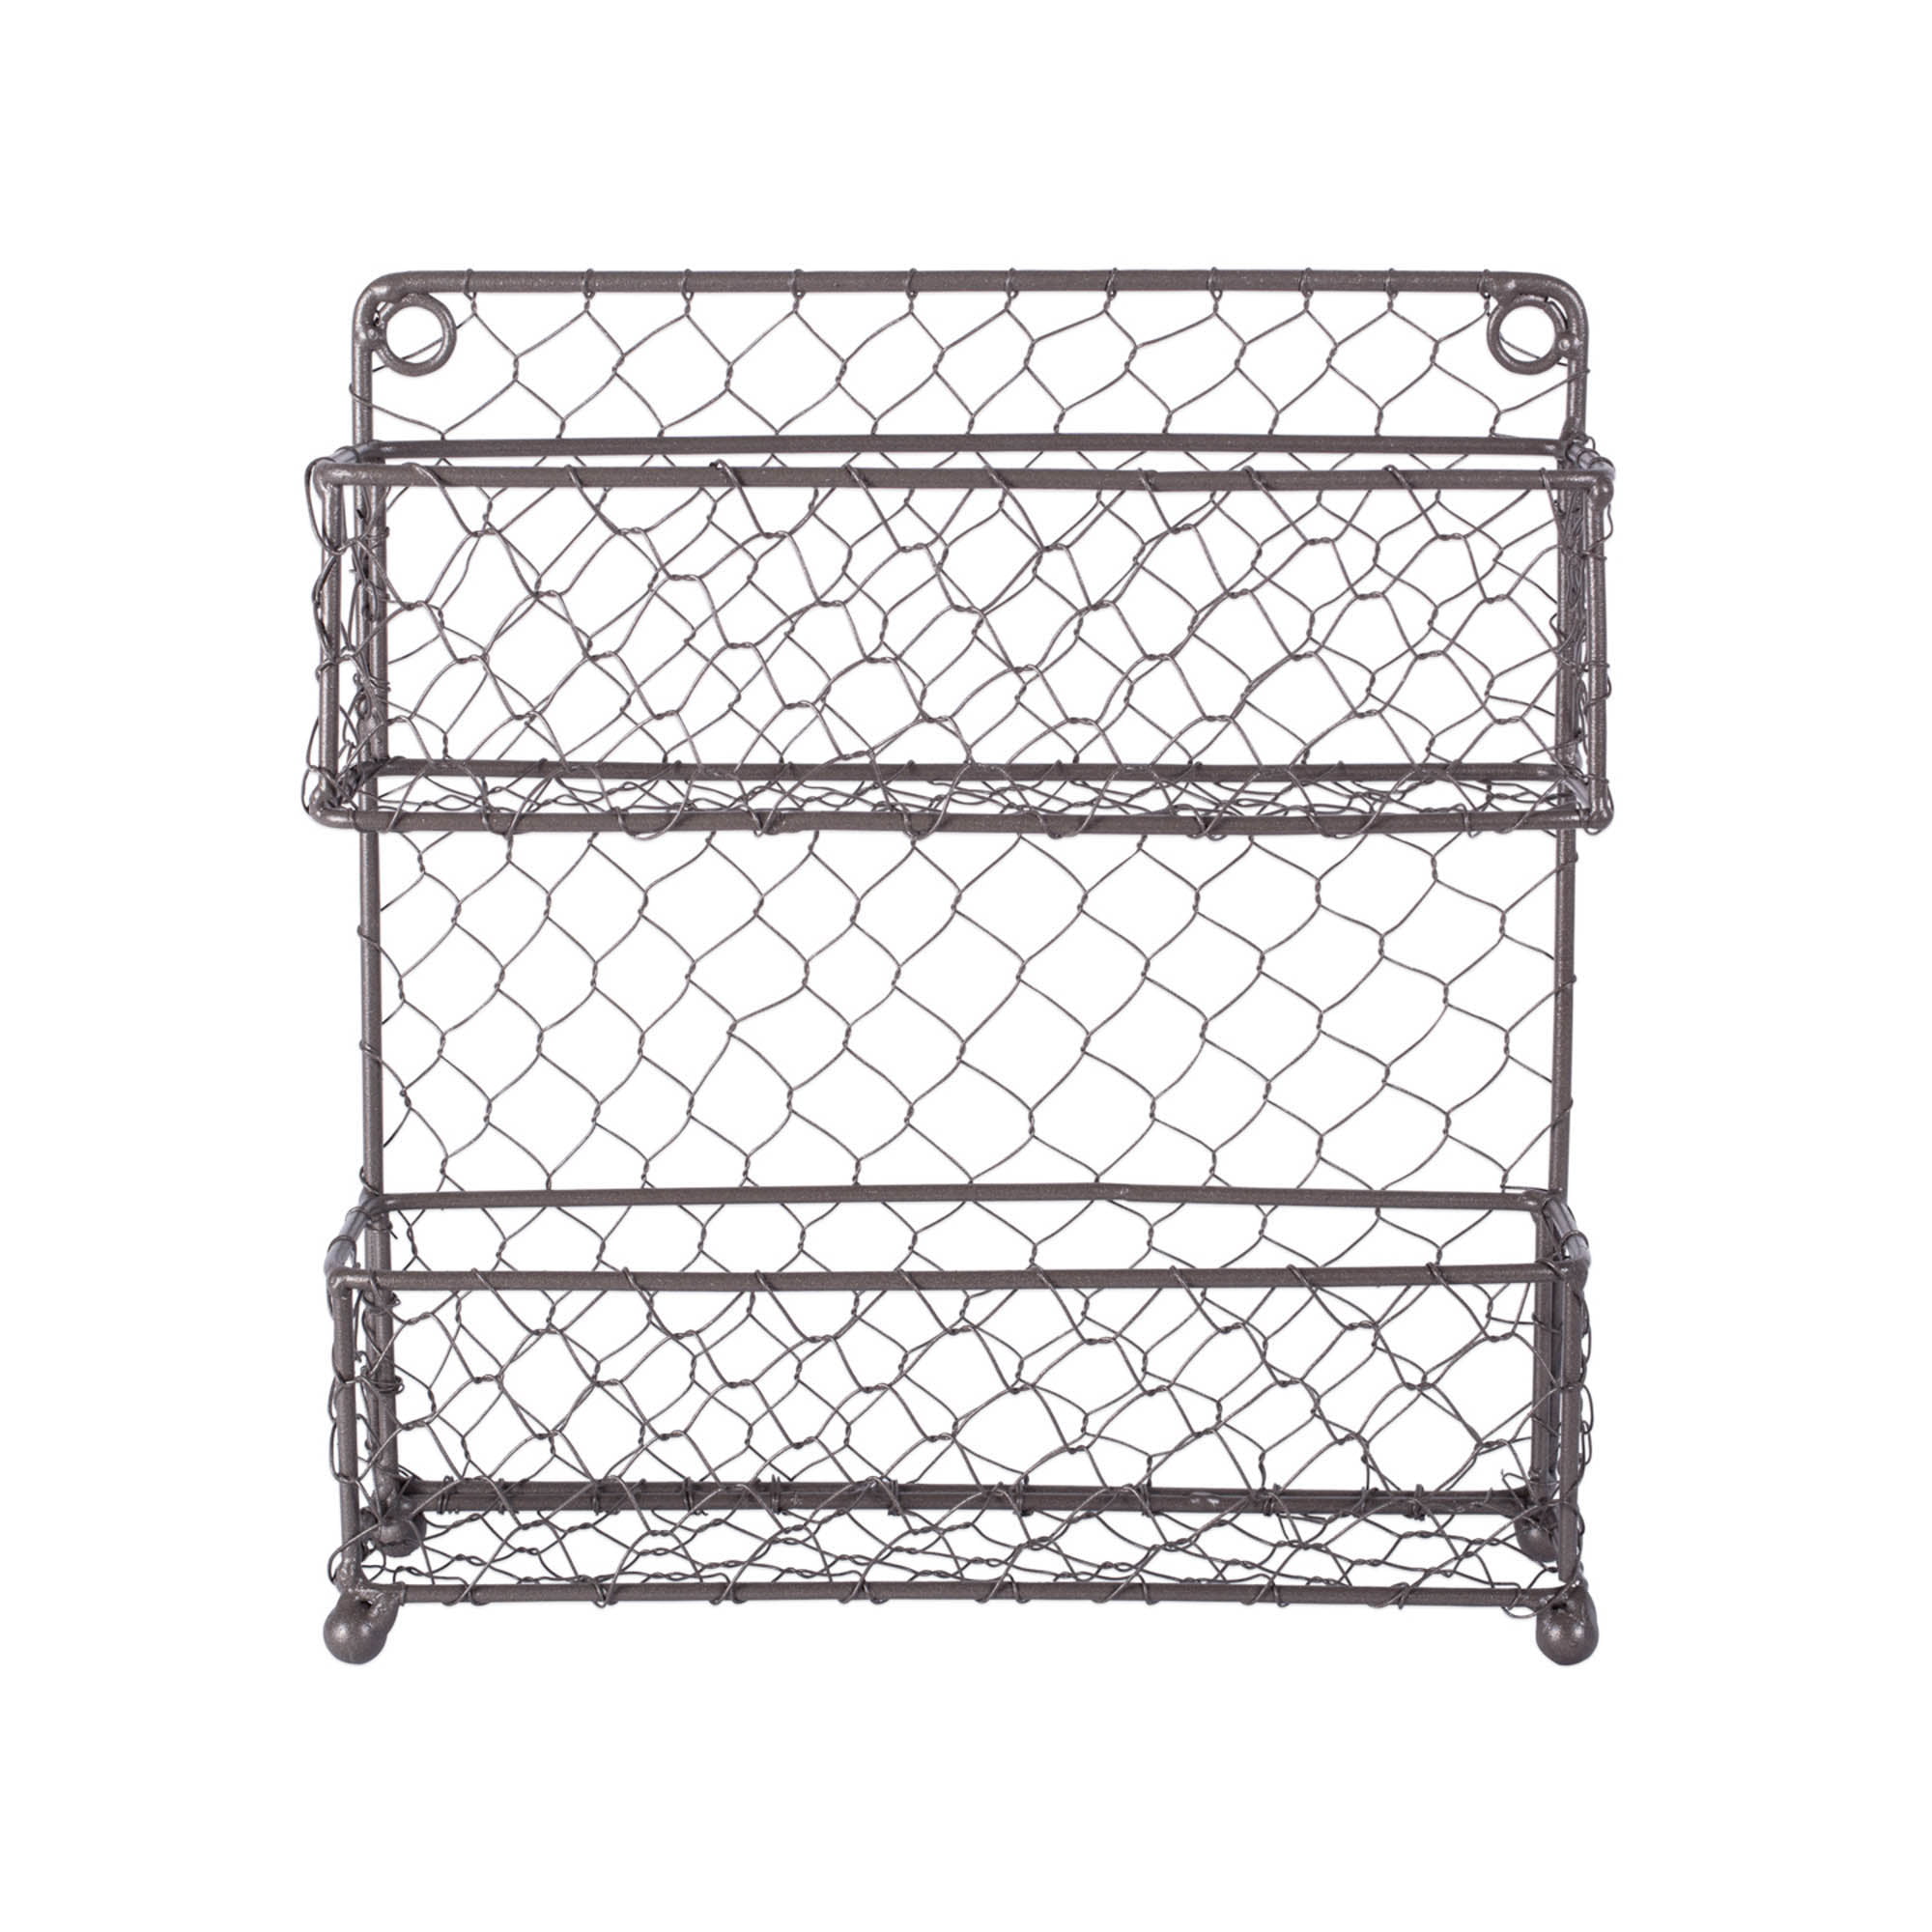 Home Traditions Z01926 Farmhouse Vintage White Metal Chicken Wire Spice Rack Org 